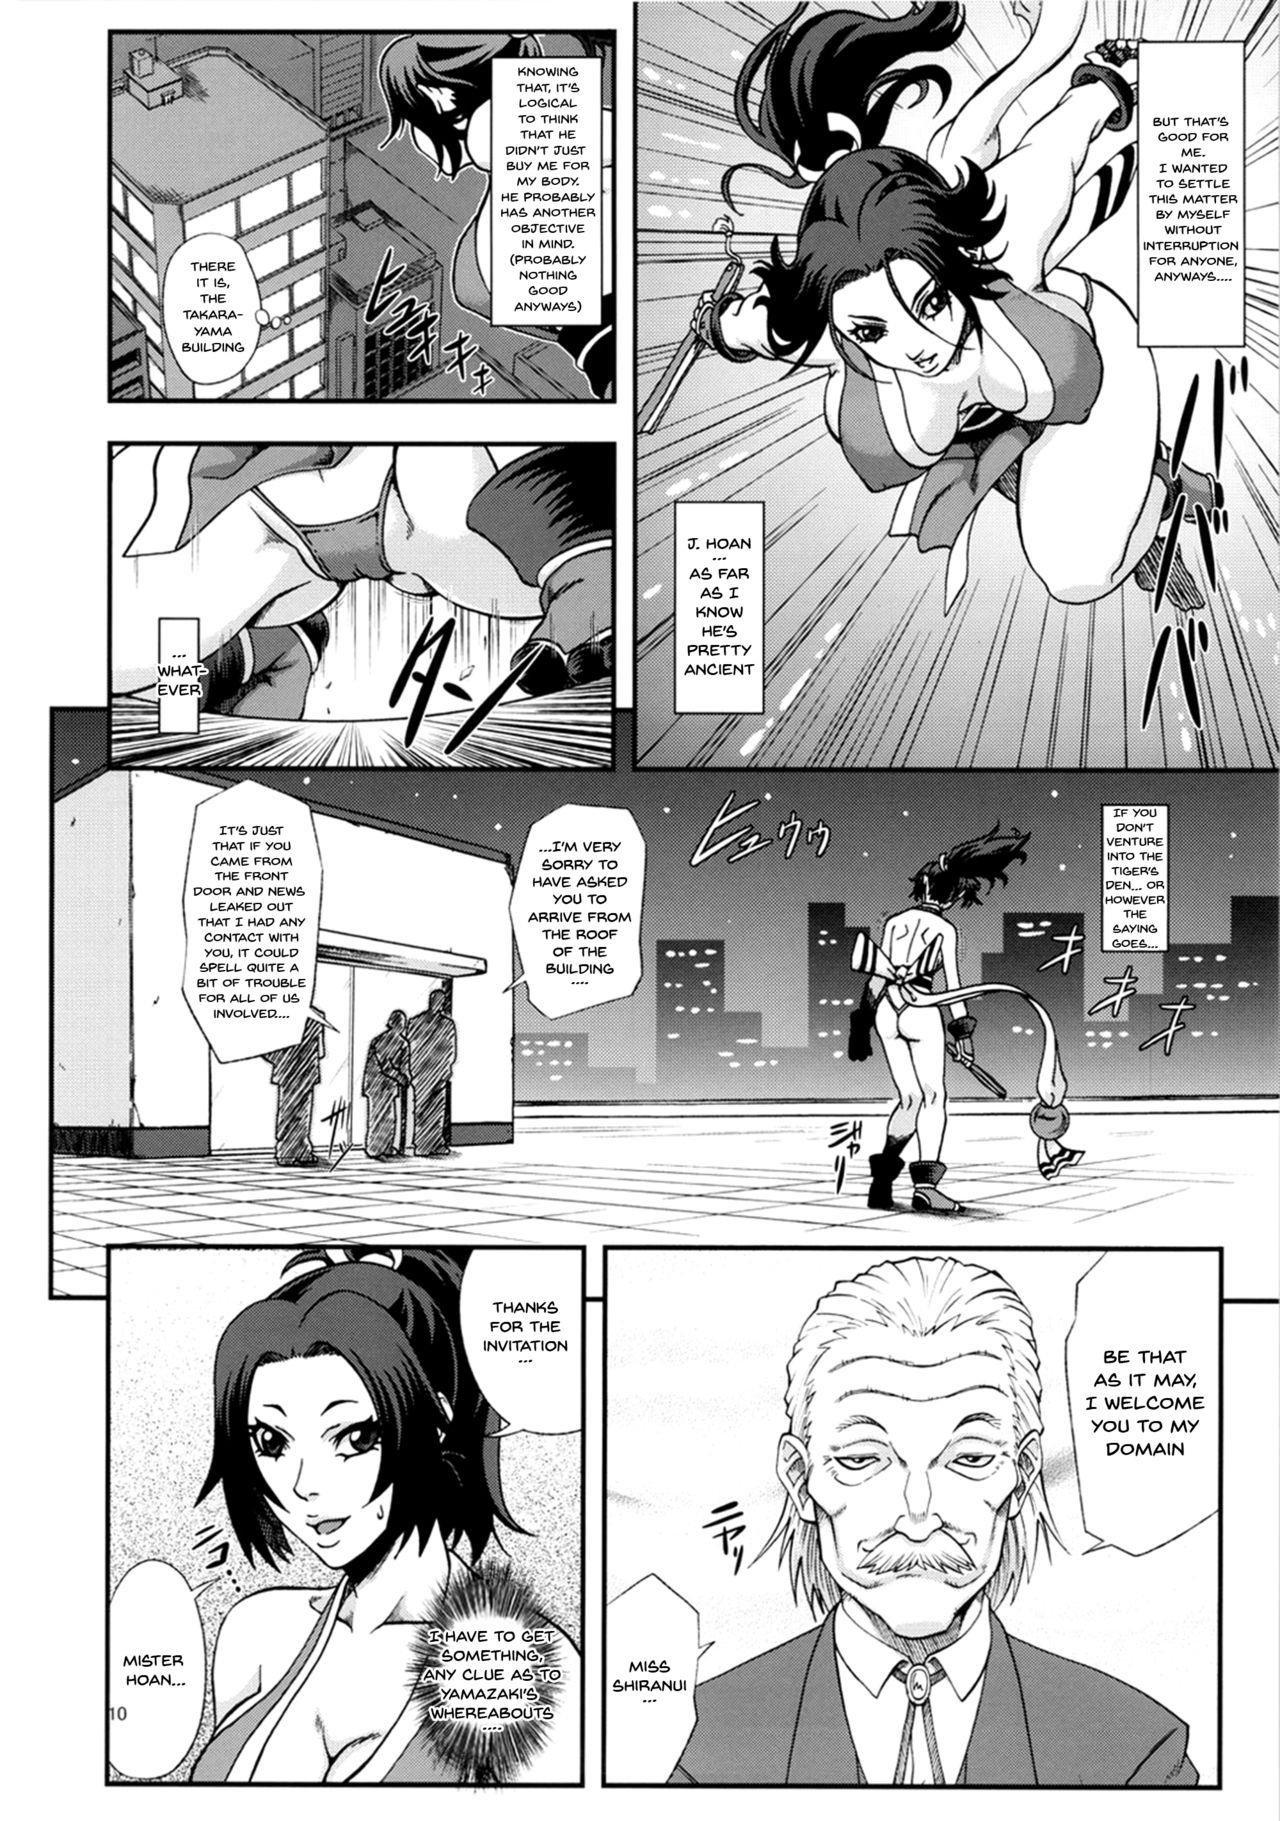 Outdoor Sex Shiranui Muzan 3 - King of fighters Homosexual - Page 9